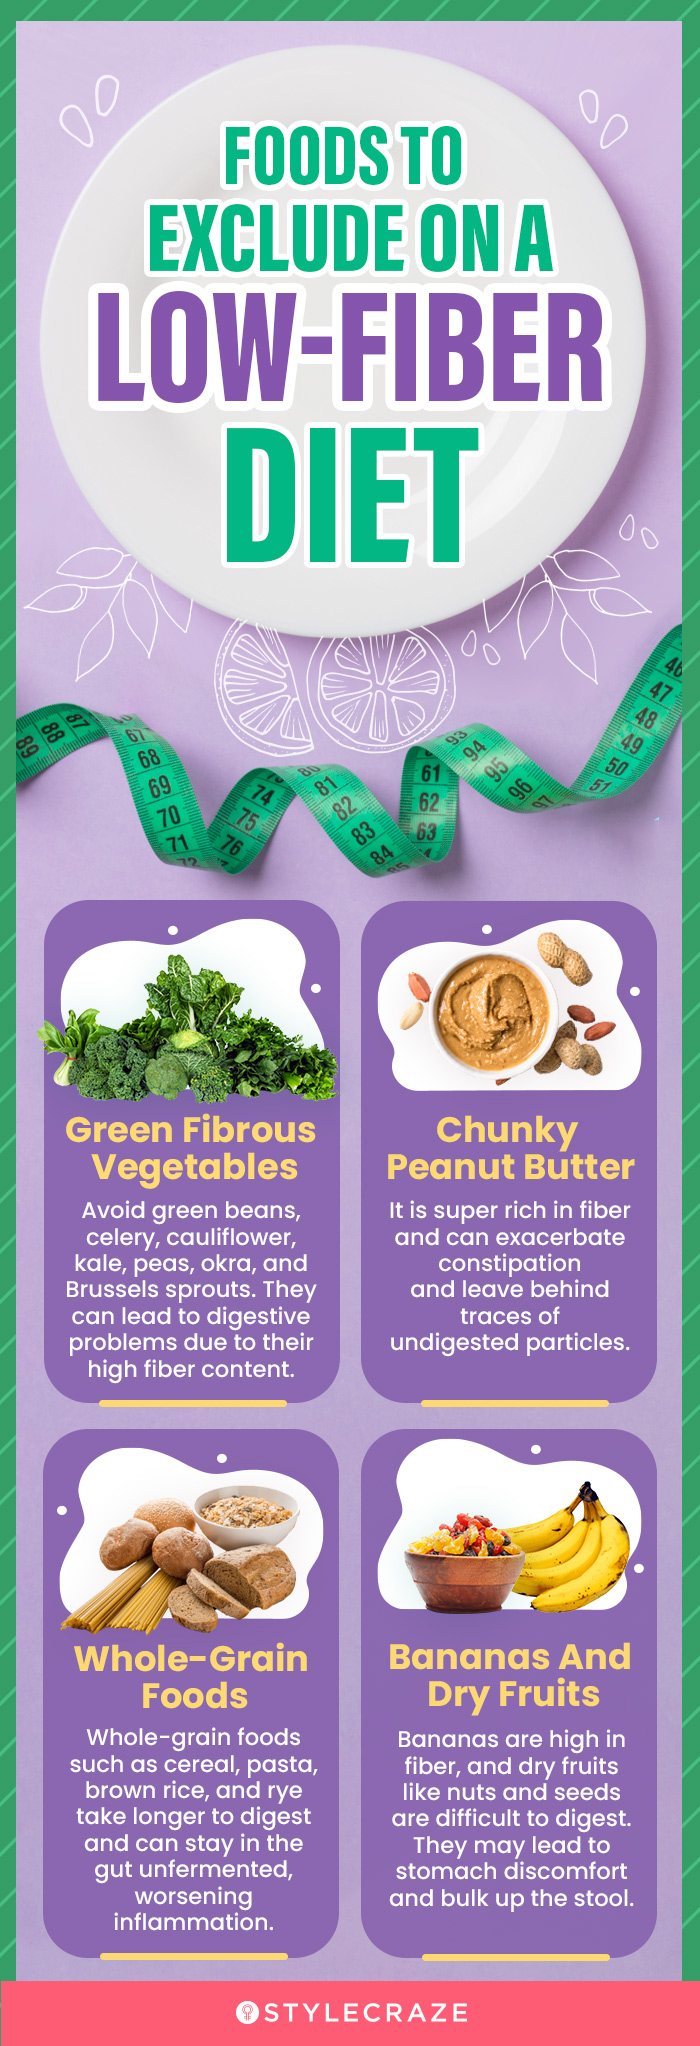 foods to exclude on a low fiber diet (infographic)